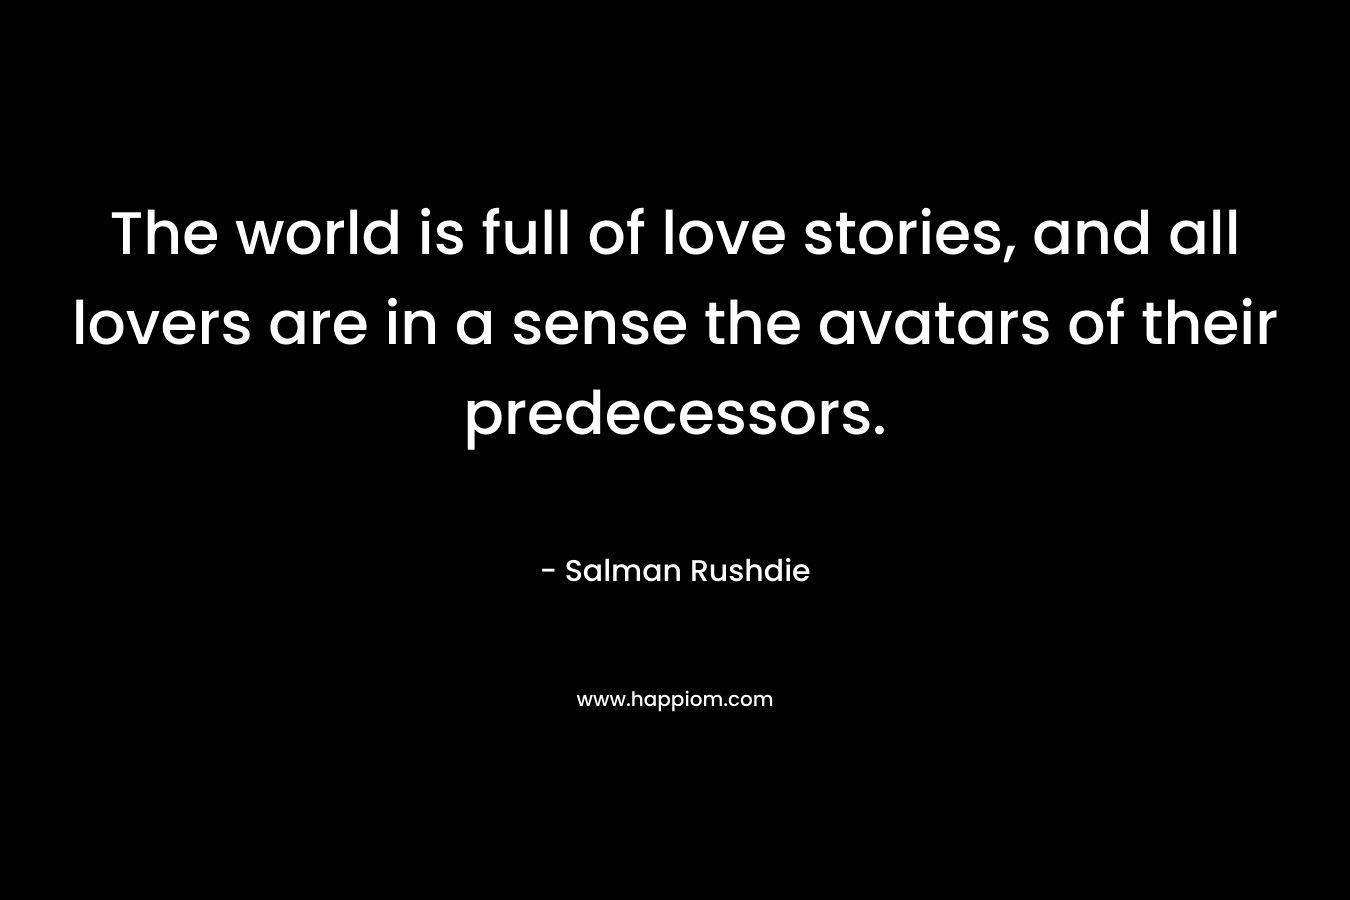 The world is full of love stories, and all lovers are in a sense the avatars of their predecessors. – Salman Rushdie